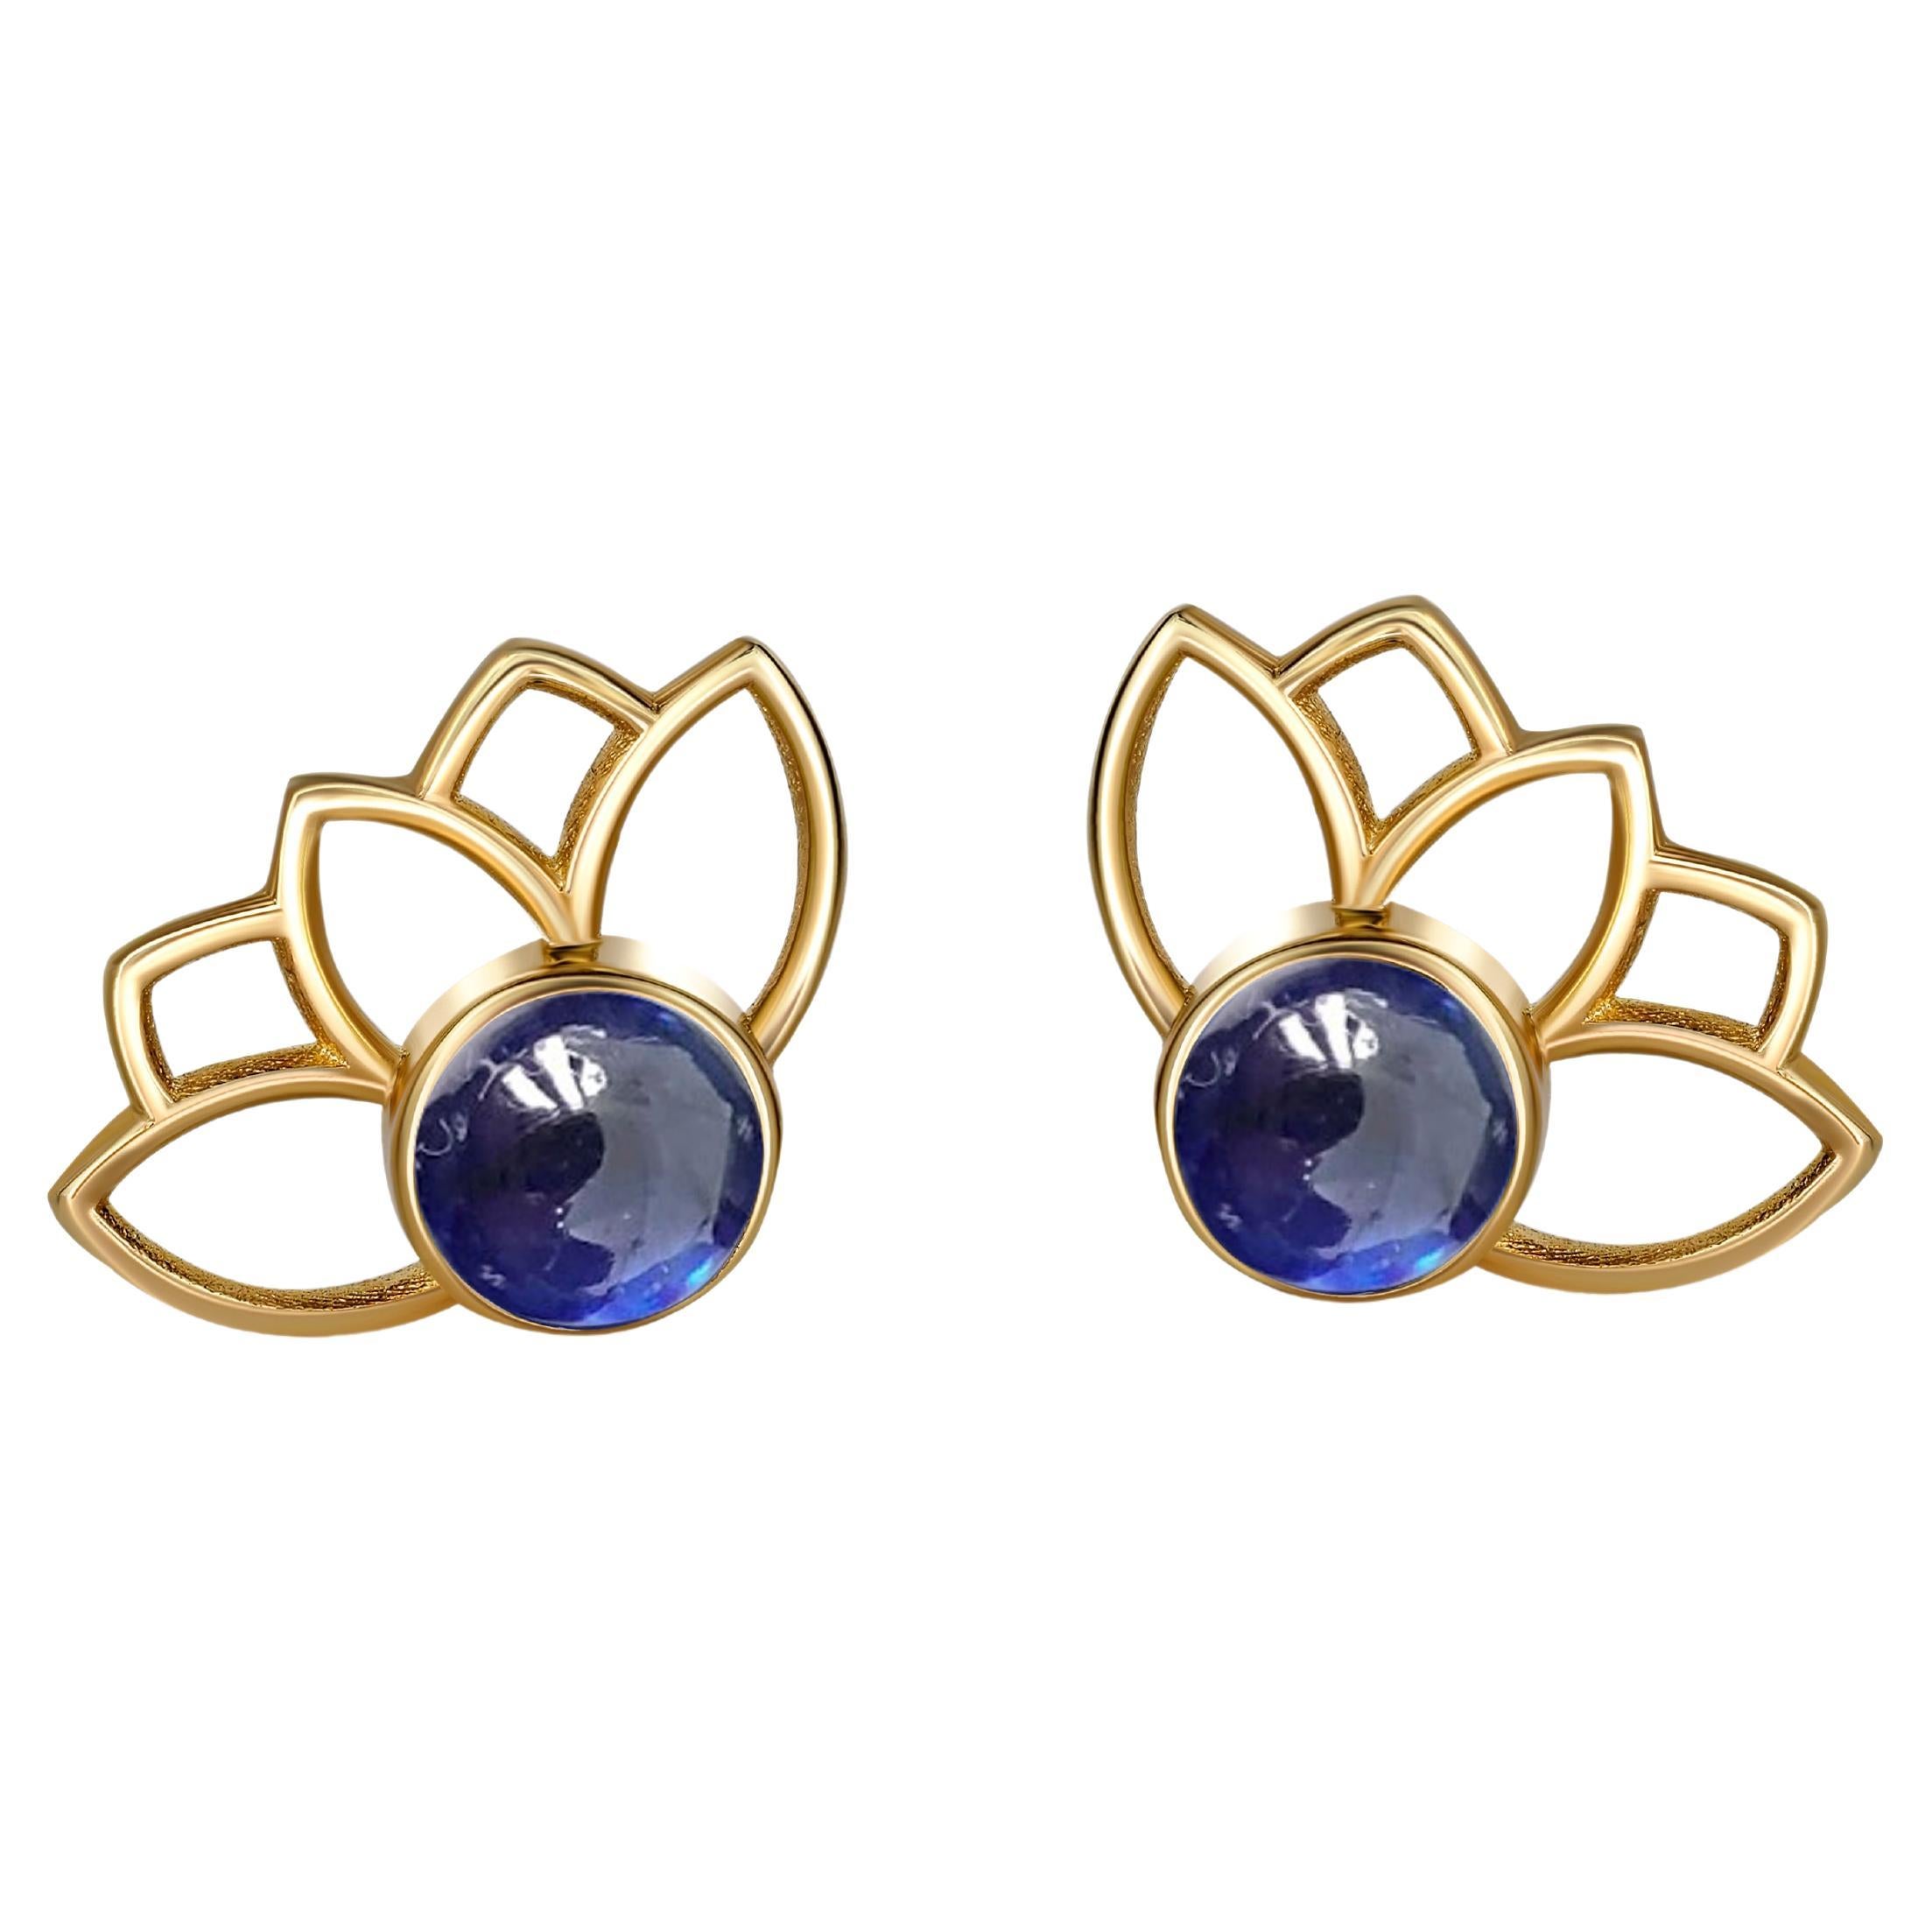 Lotus Earrings Studs with Sapphires in 14k Gold, Blue Sapphire Gold Earrings For Sale